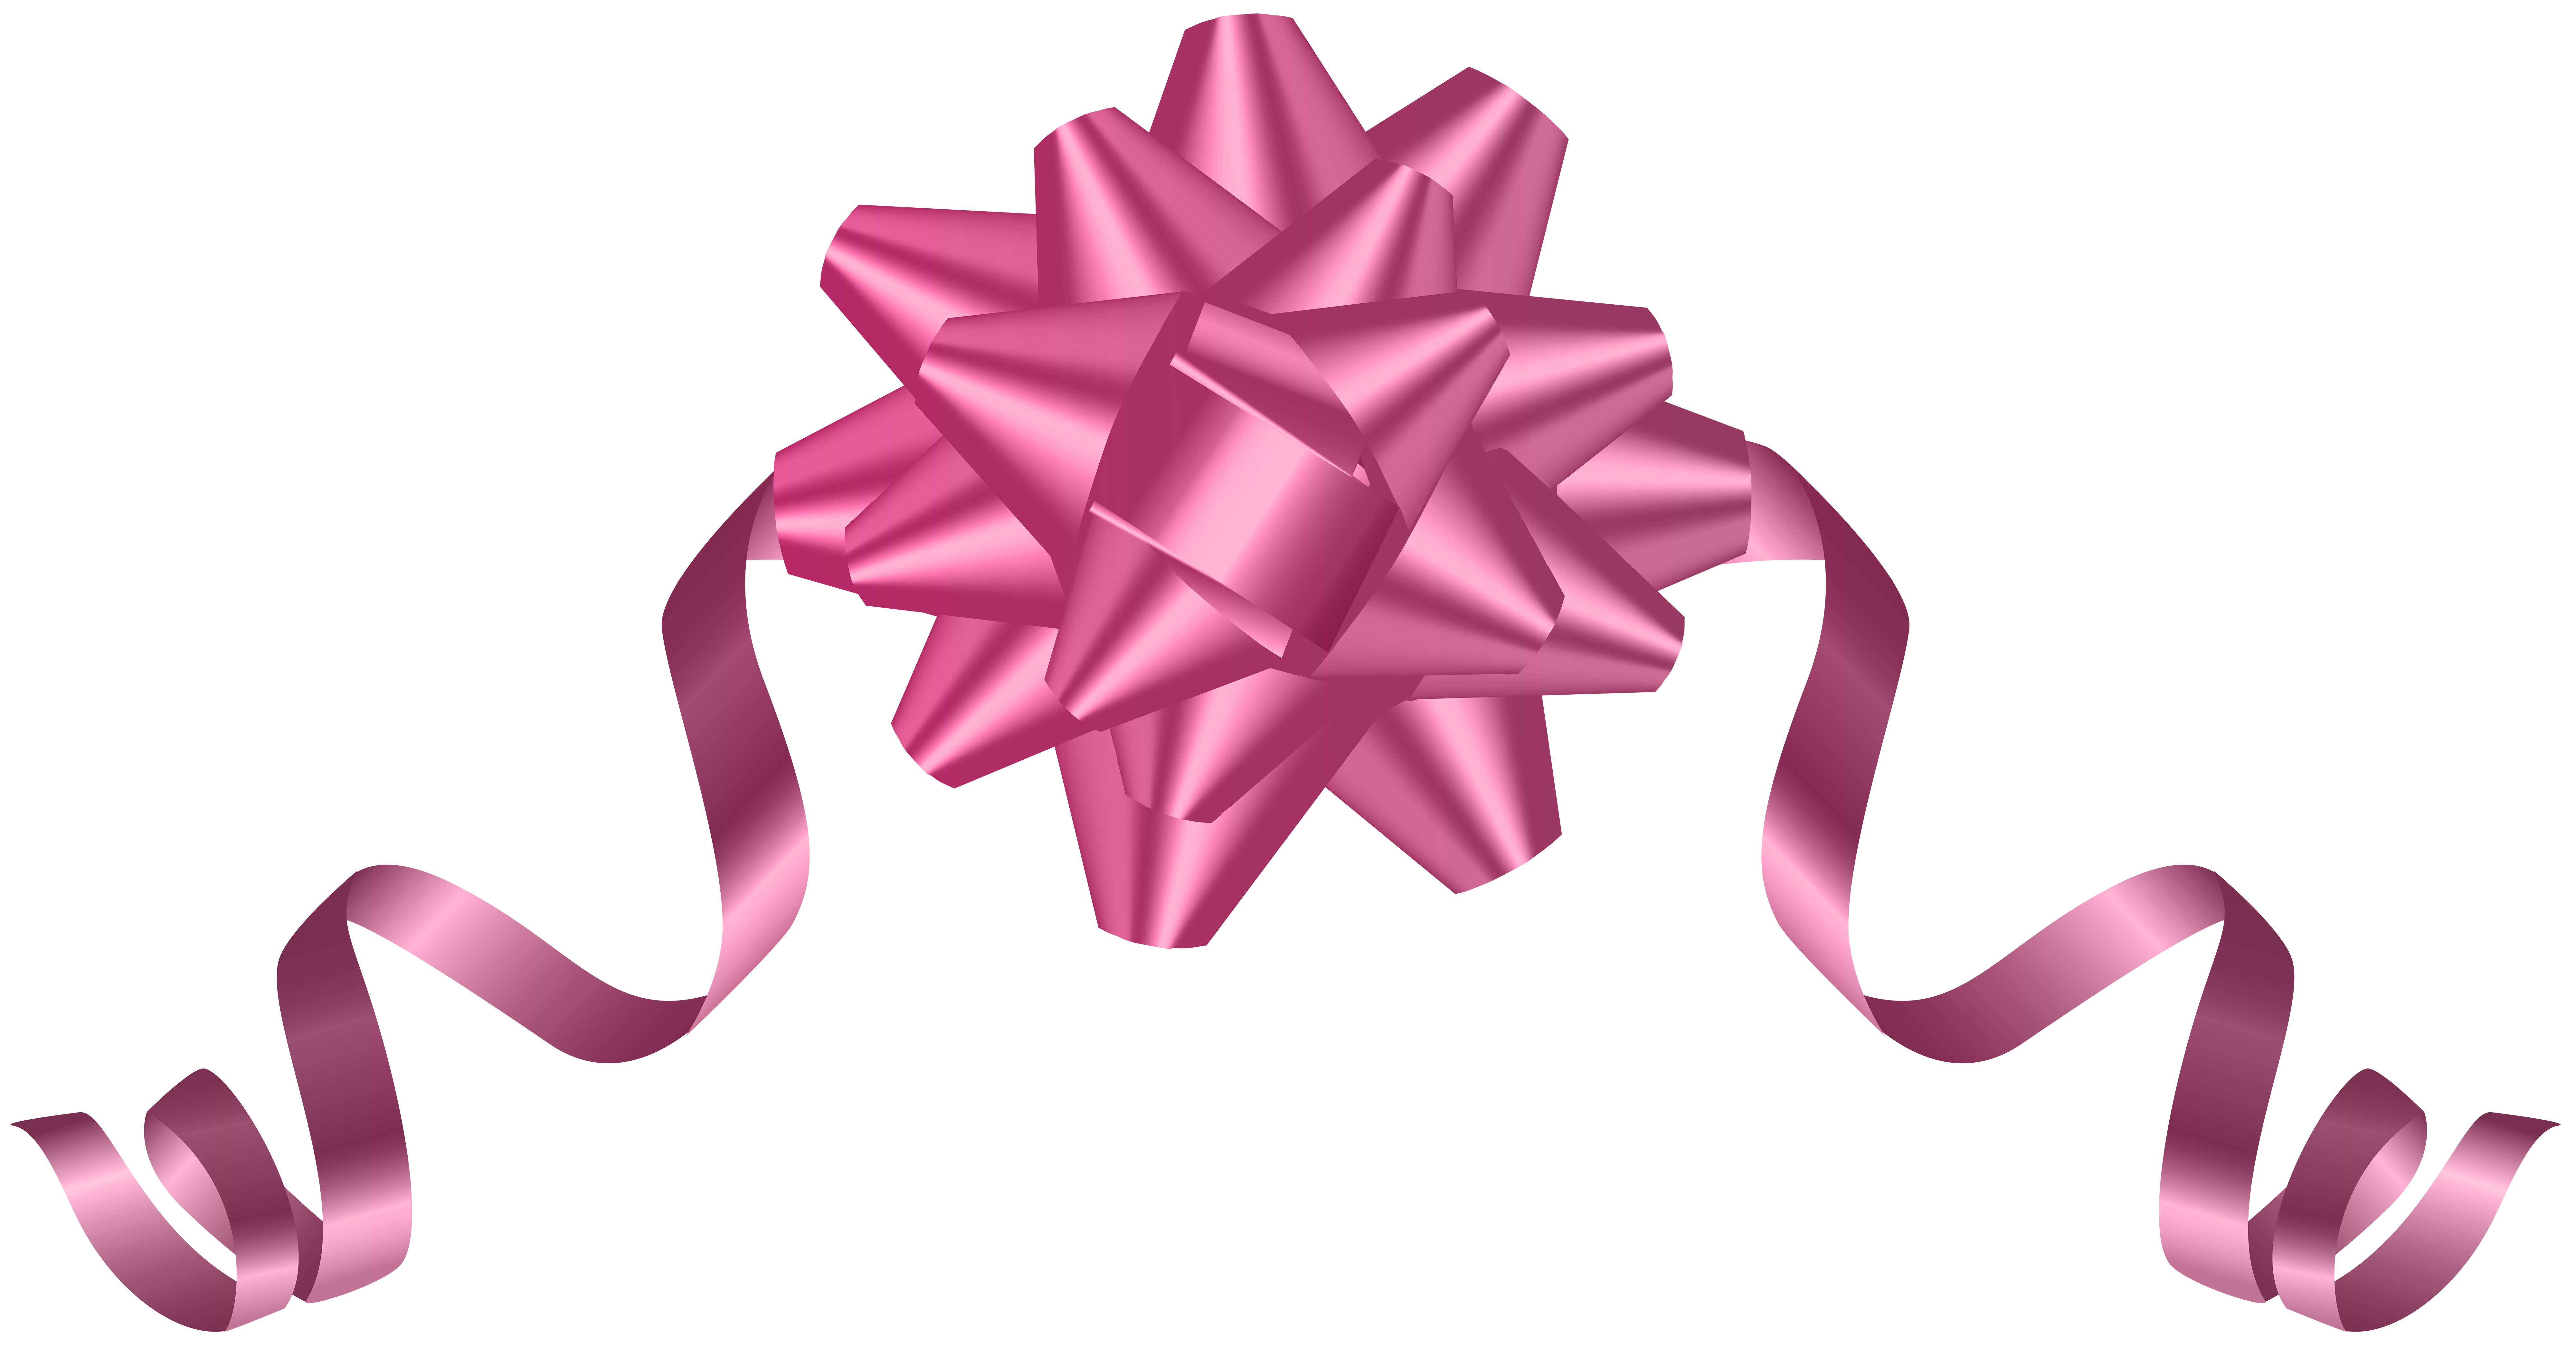 Pink Bow Transparent Clip Art Image​, Gallery Yopriceville - High-Quality  Images and Transparent PNG Free Clipart